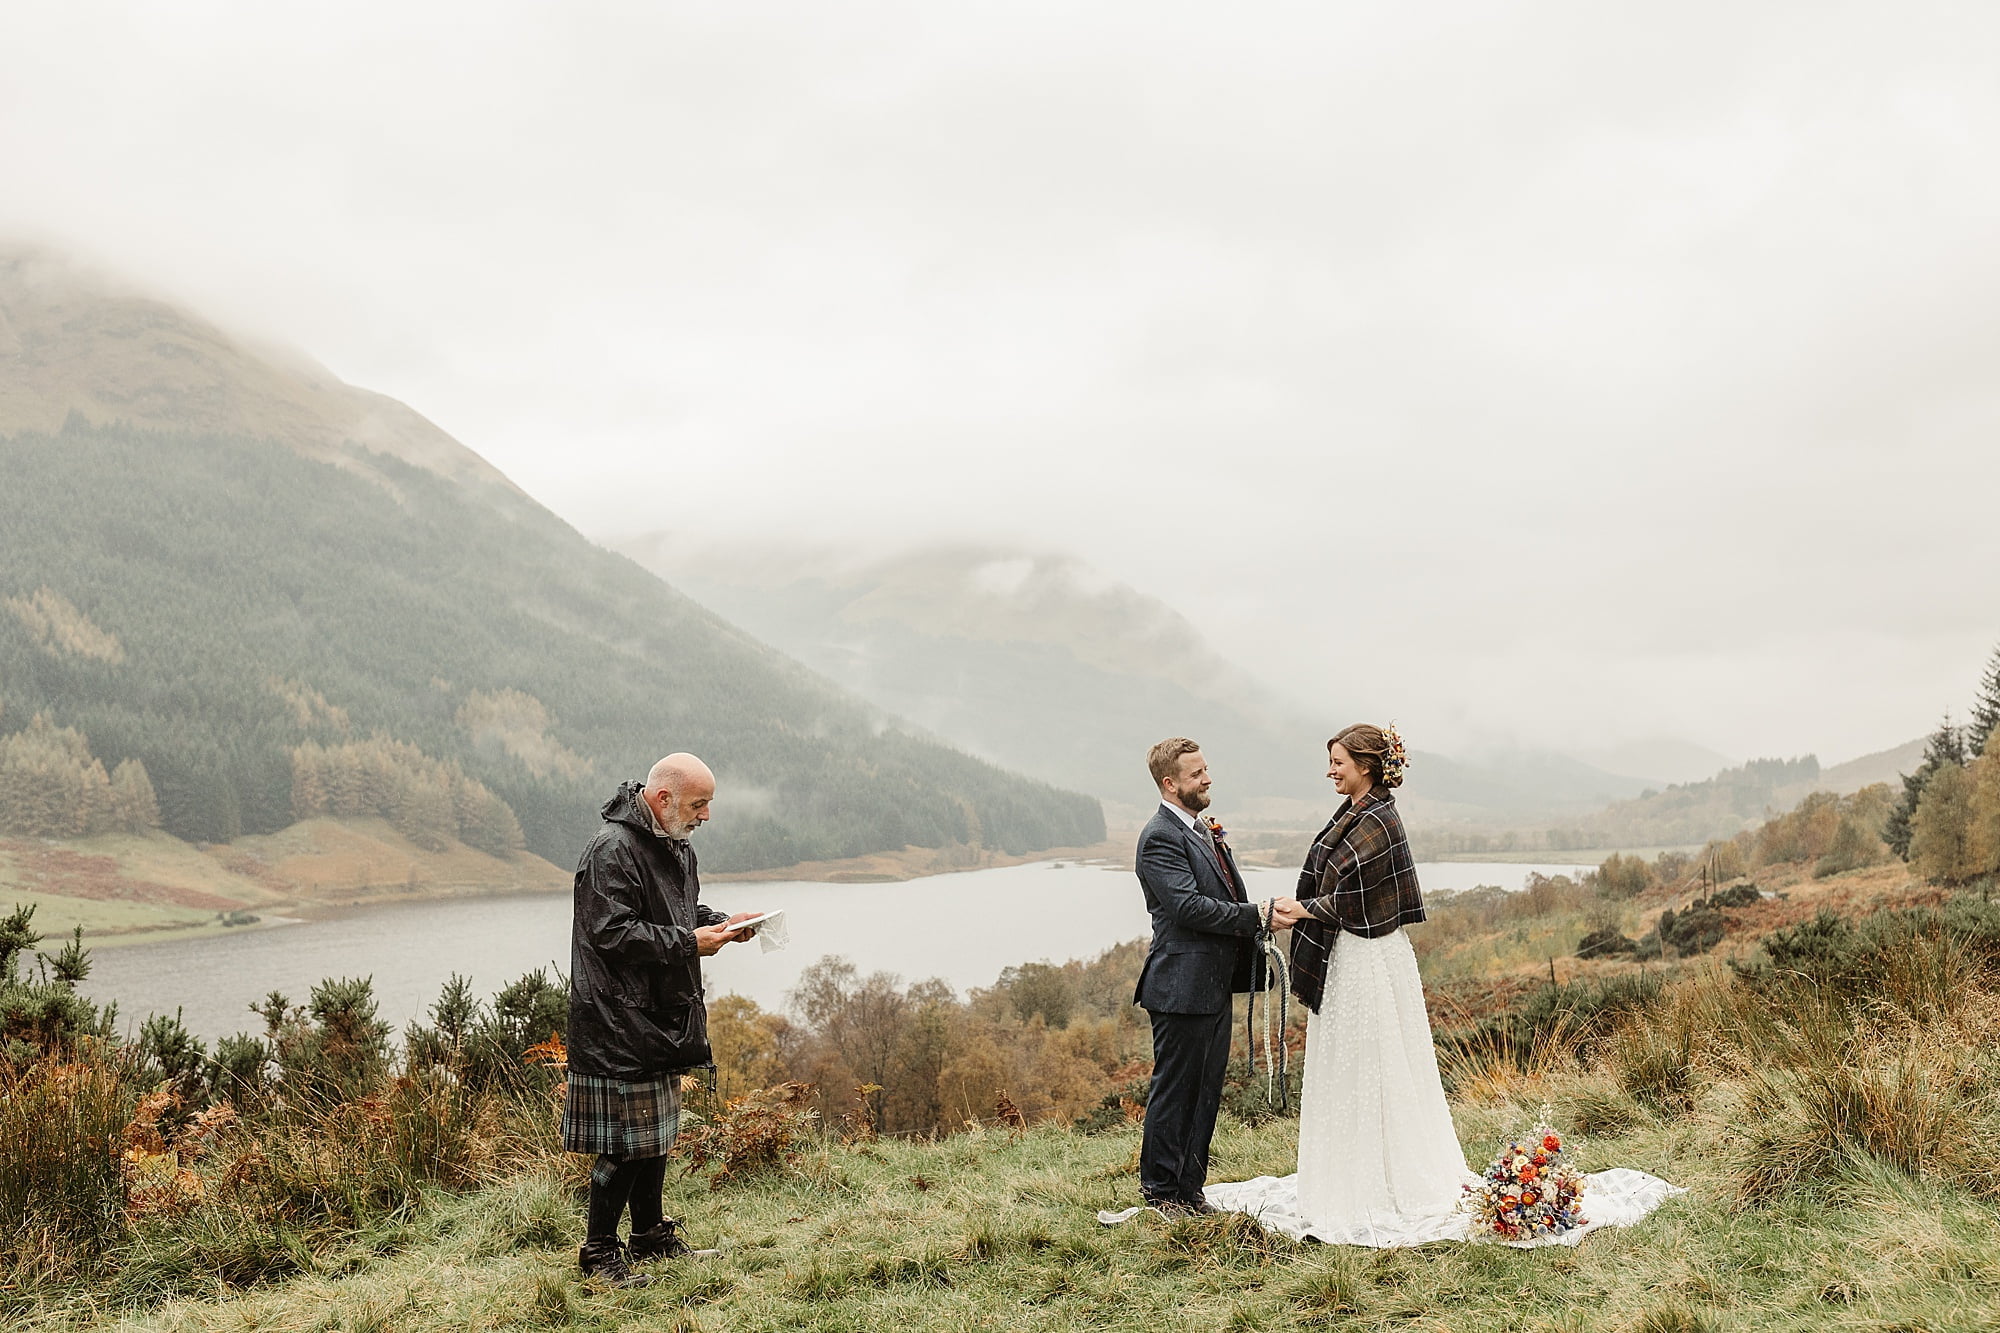 monachyle mhor ceremony outside elopement in the rain with umbrella bride and groom tartan blanket hand fastening gary the humanist